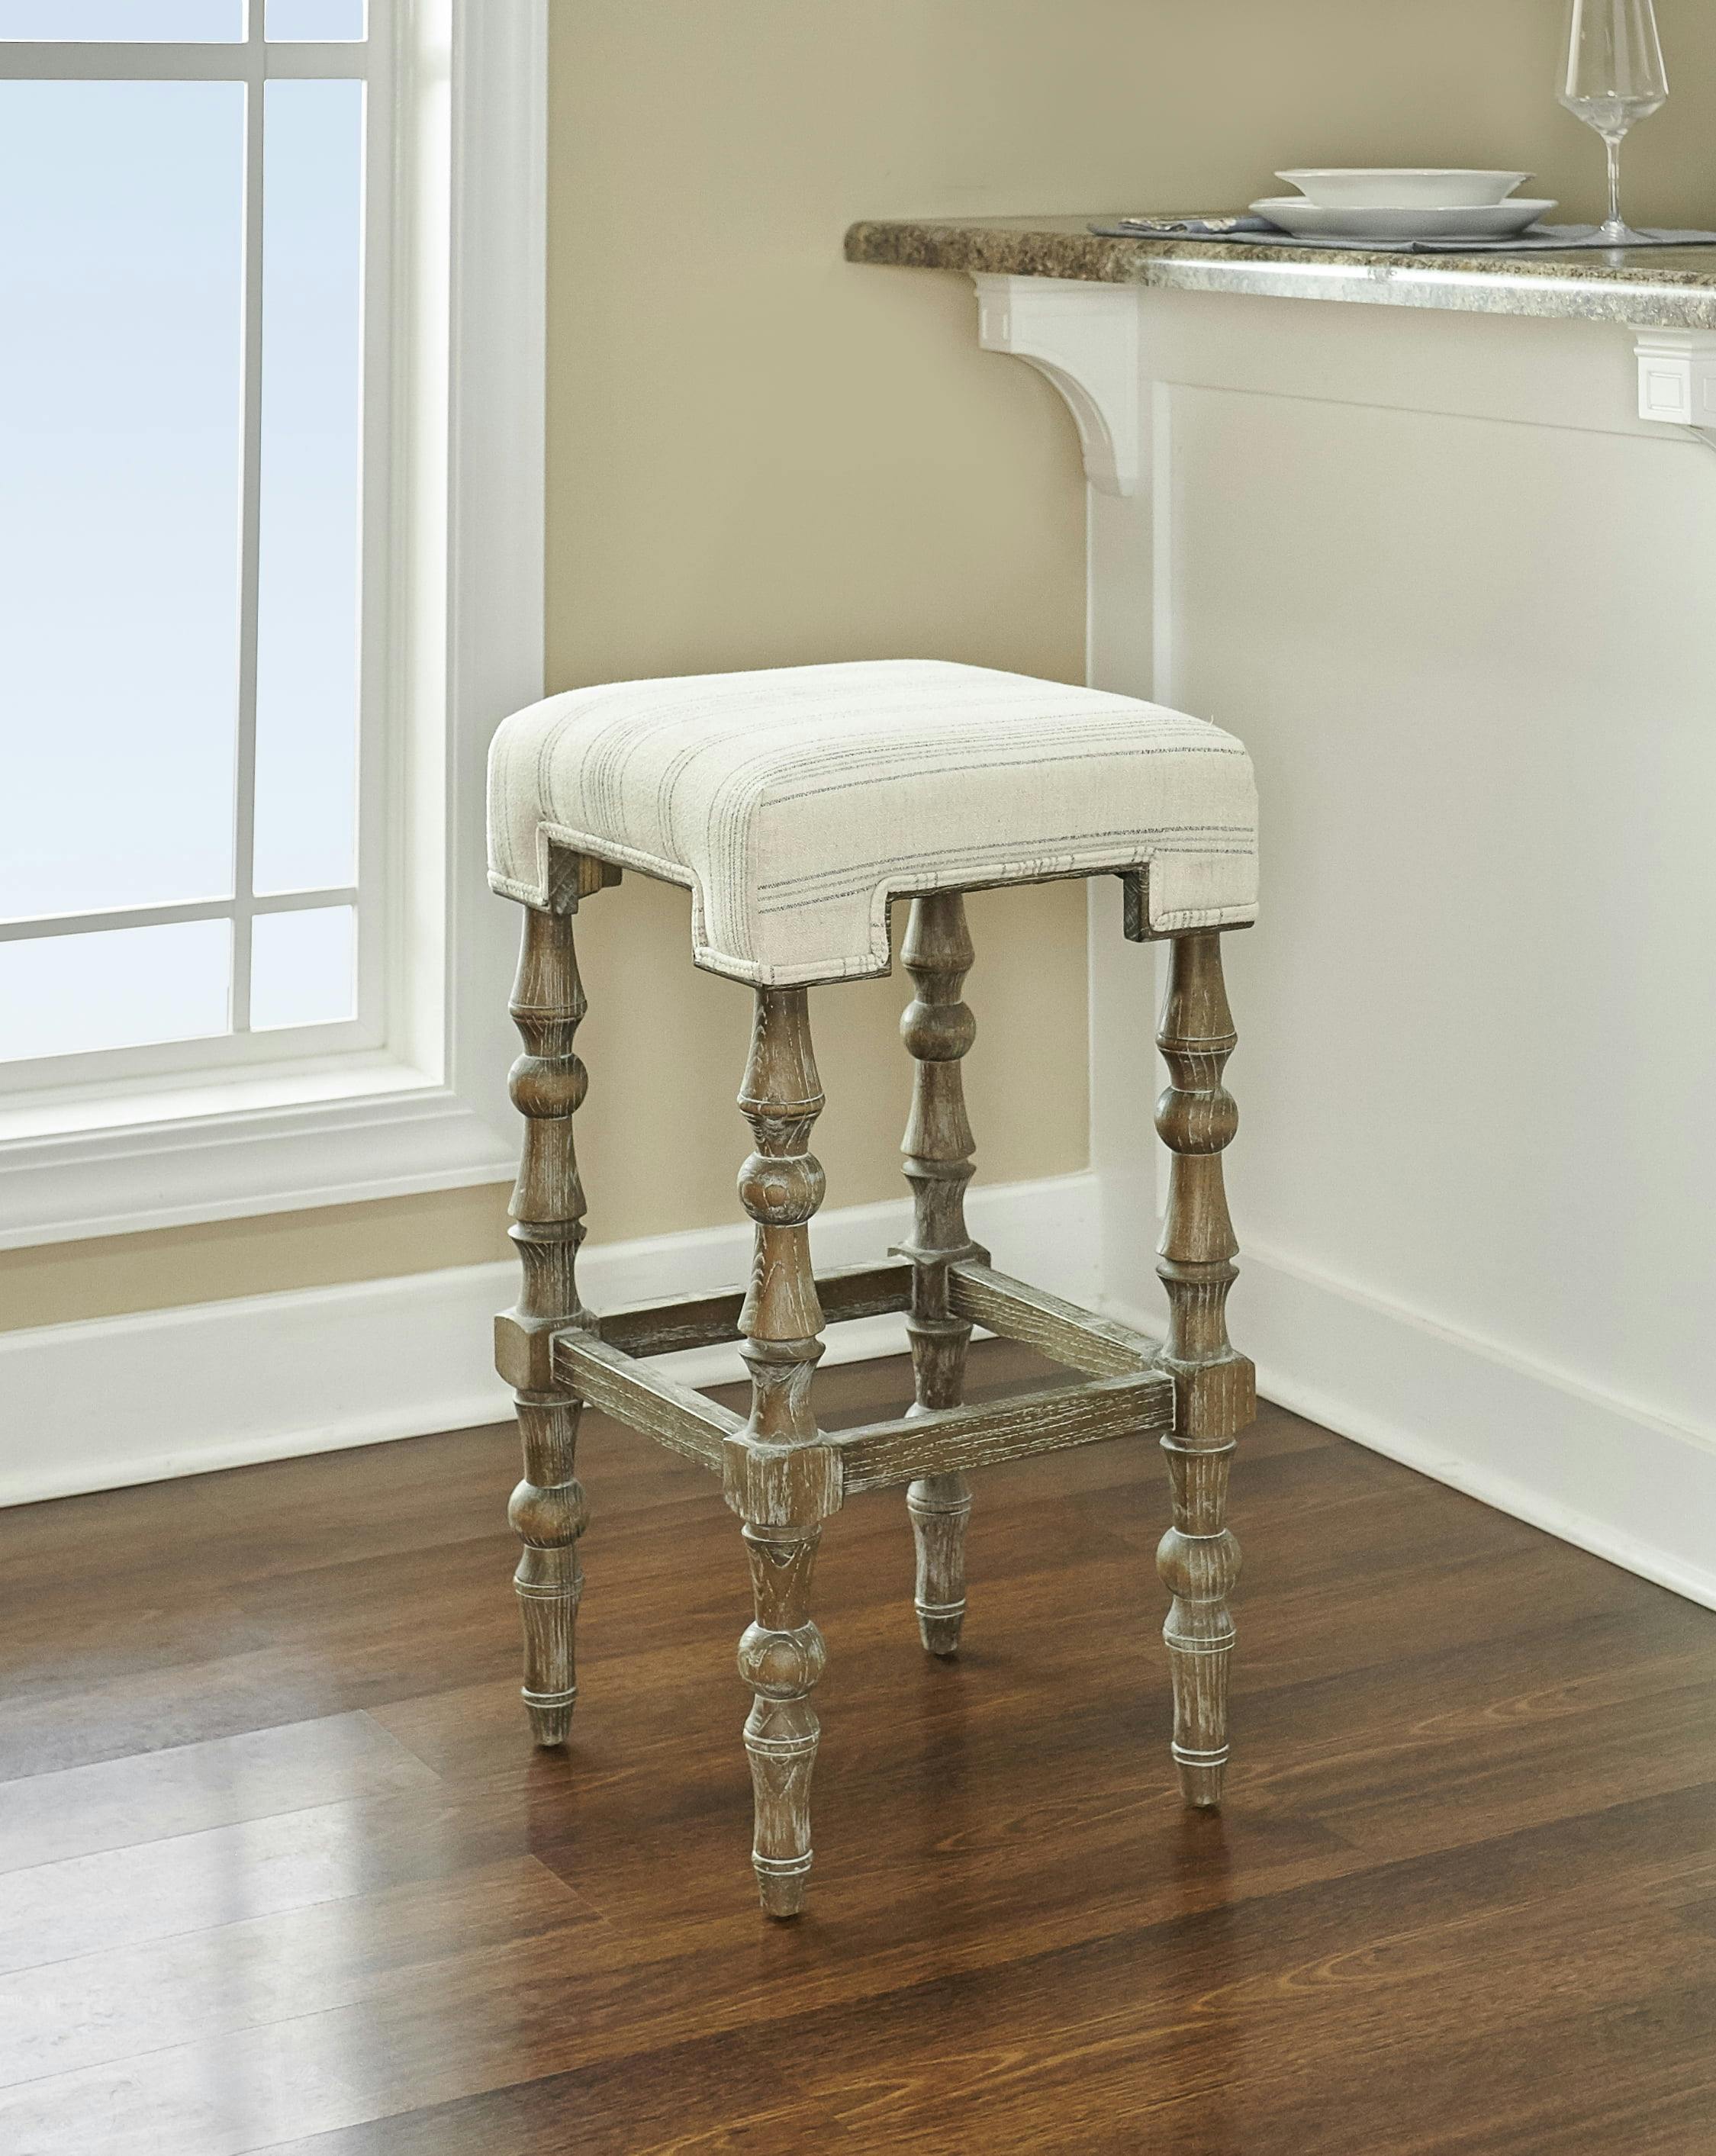 Rustic Charm Backless Barstool in Brown Finish with Geometric Seat